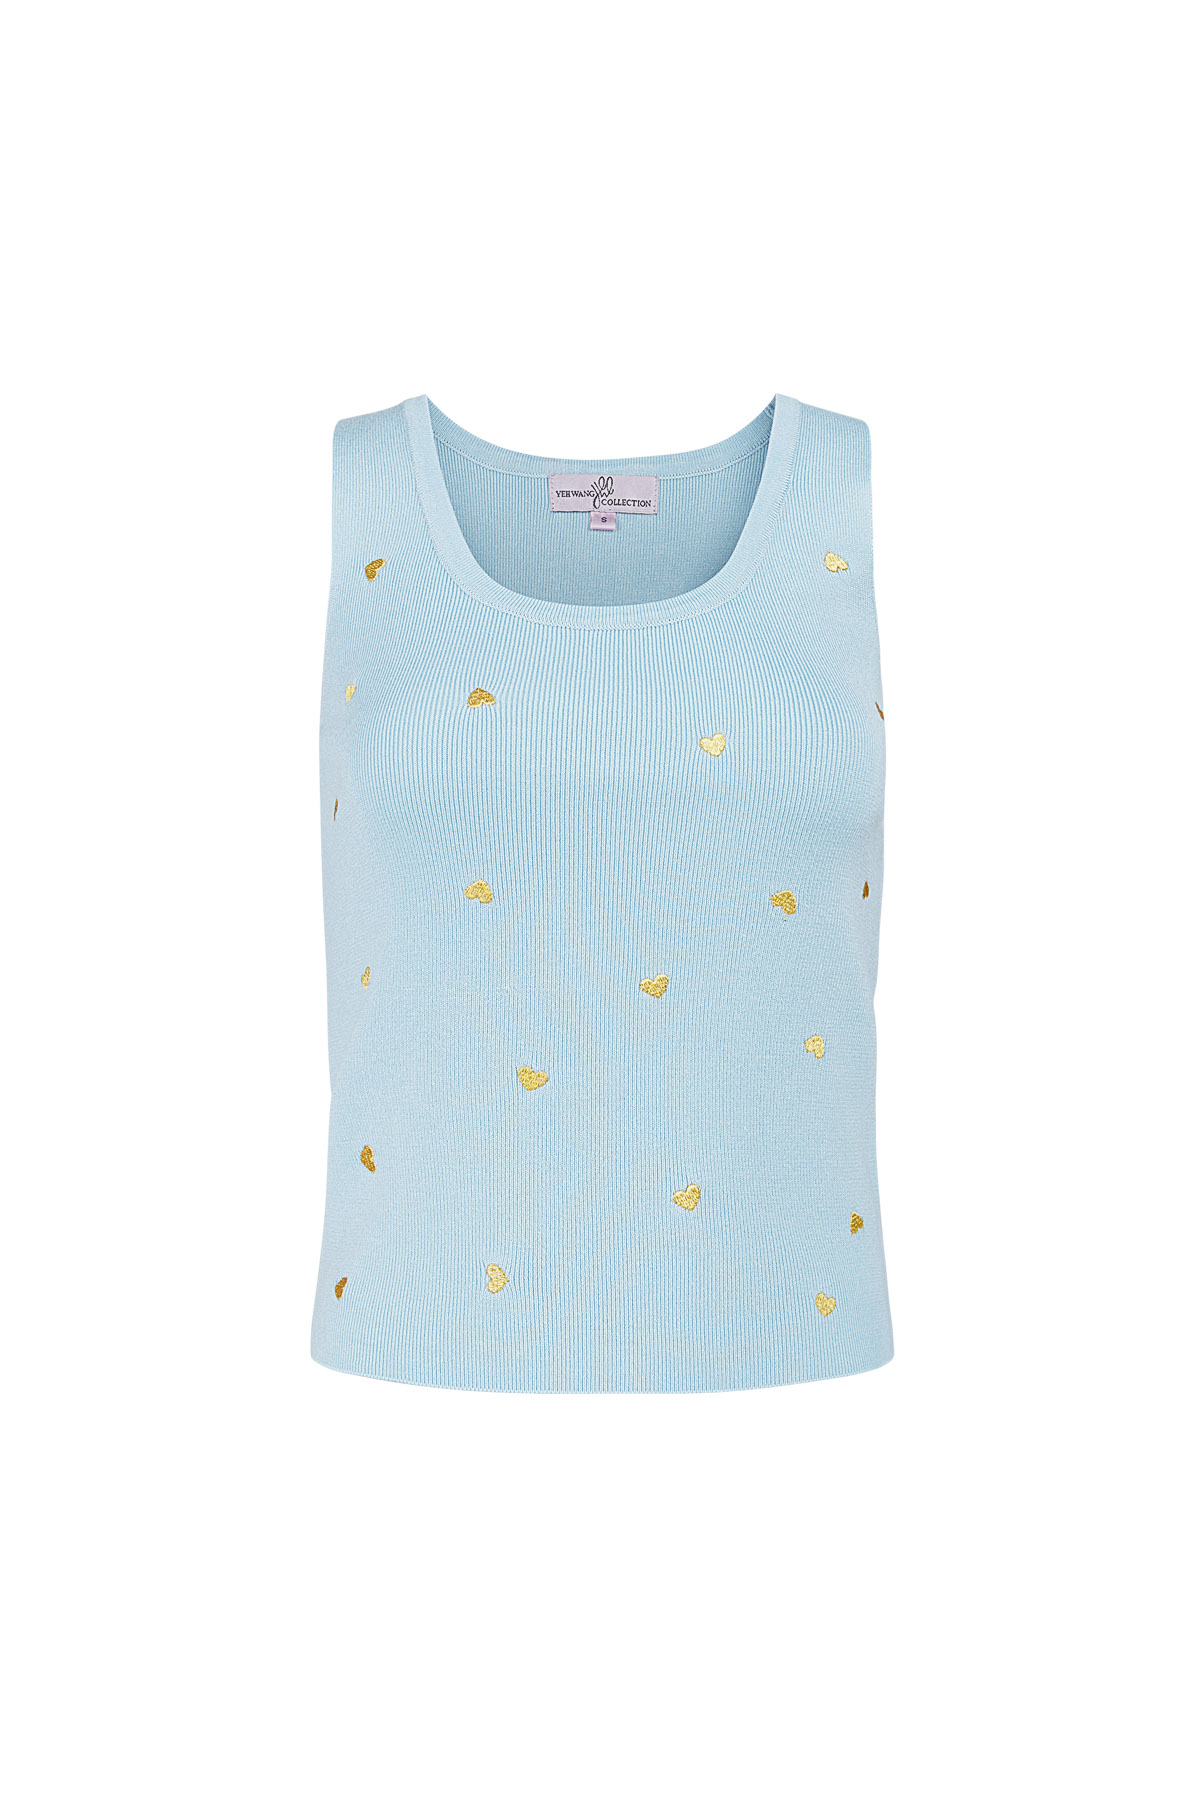 Sleeveless top with gold heart details large - blue 